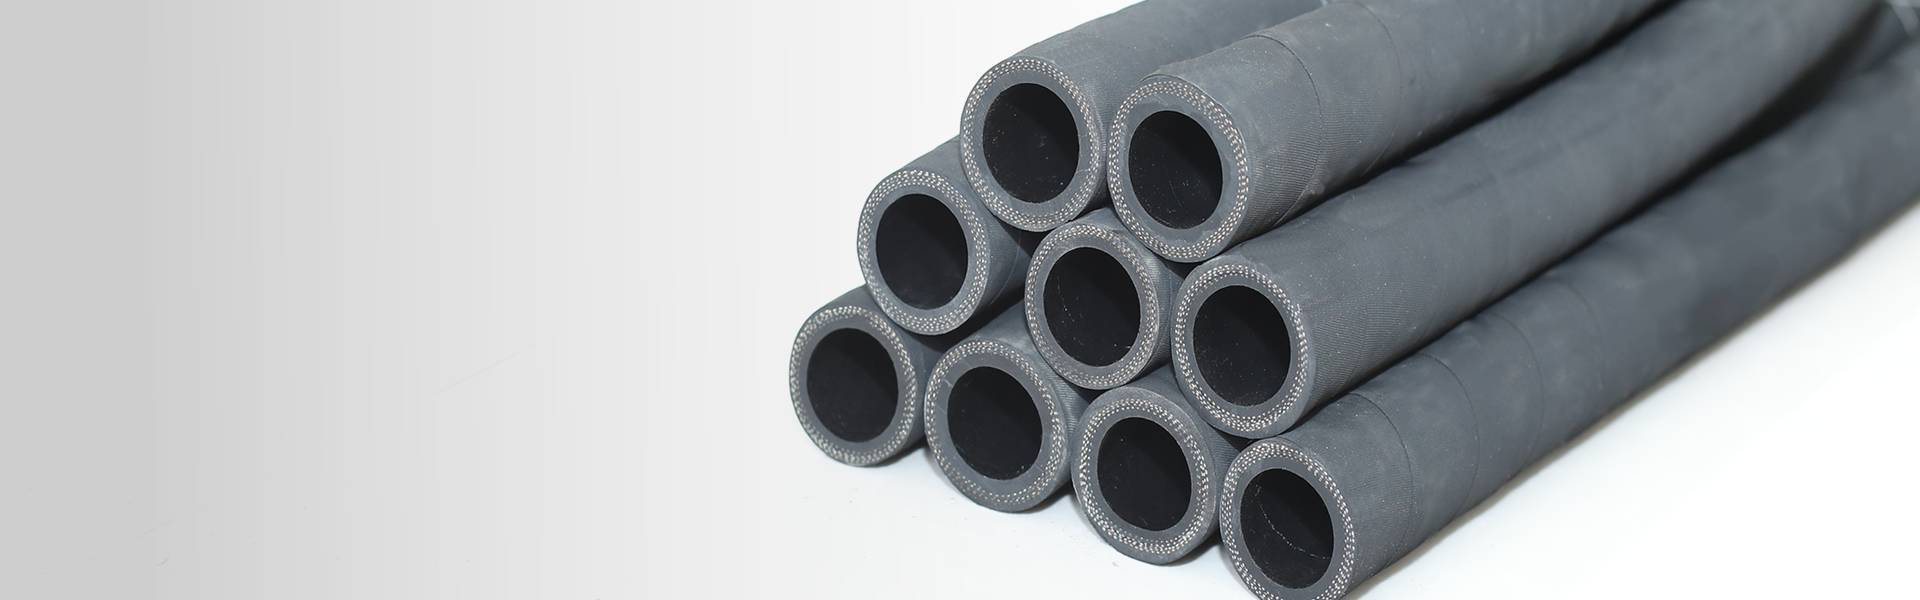 Diesel delivery hose for low pressure conditions